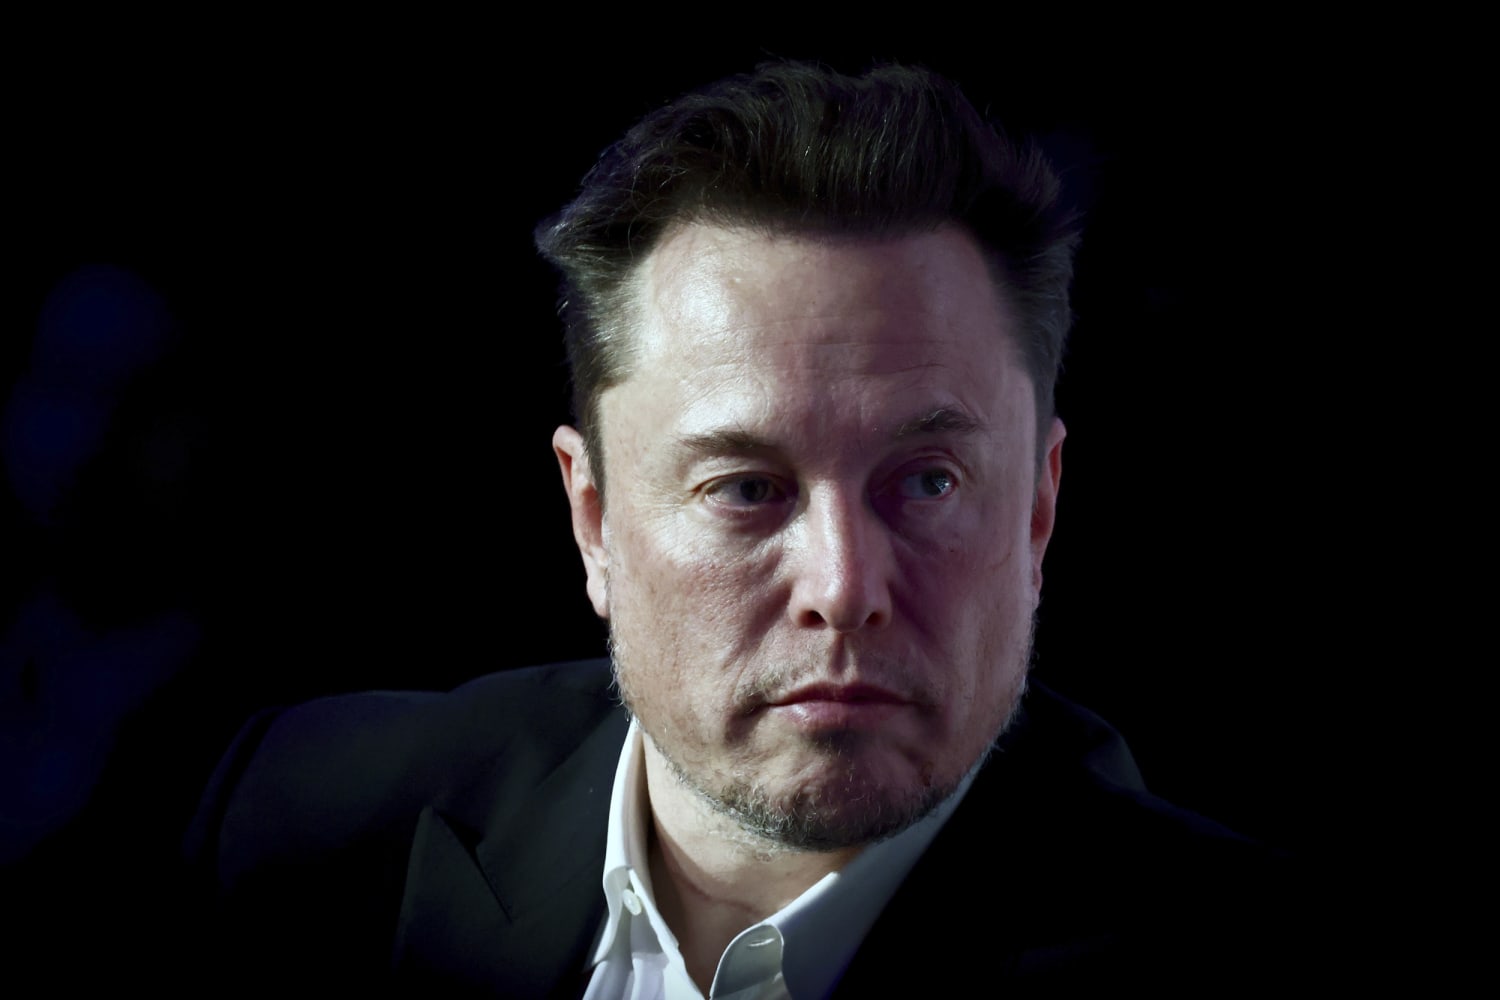 Elon Musk’s Company Successfully Implants Chip in Human Brain